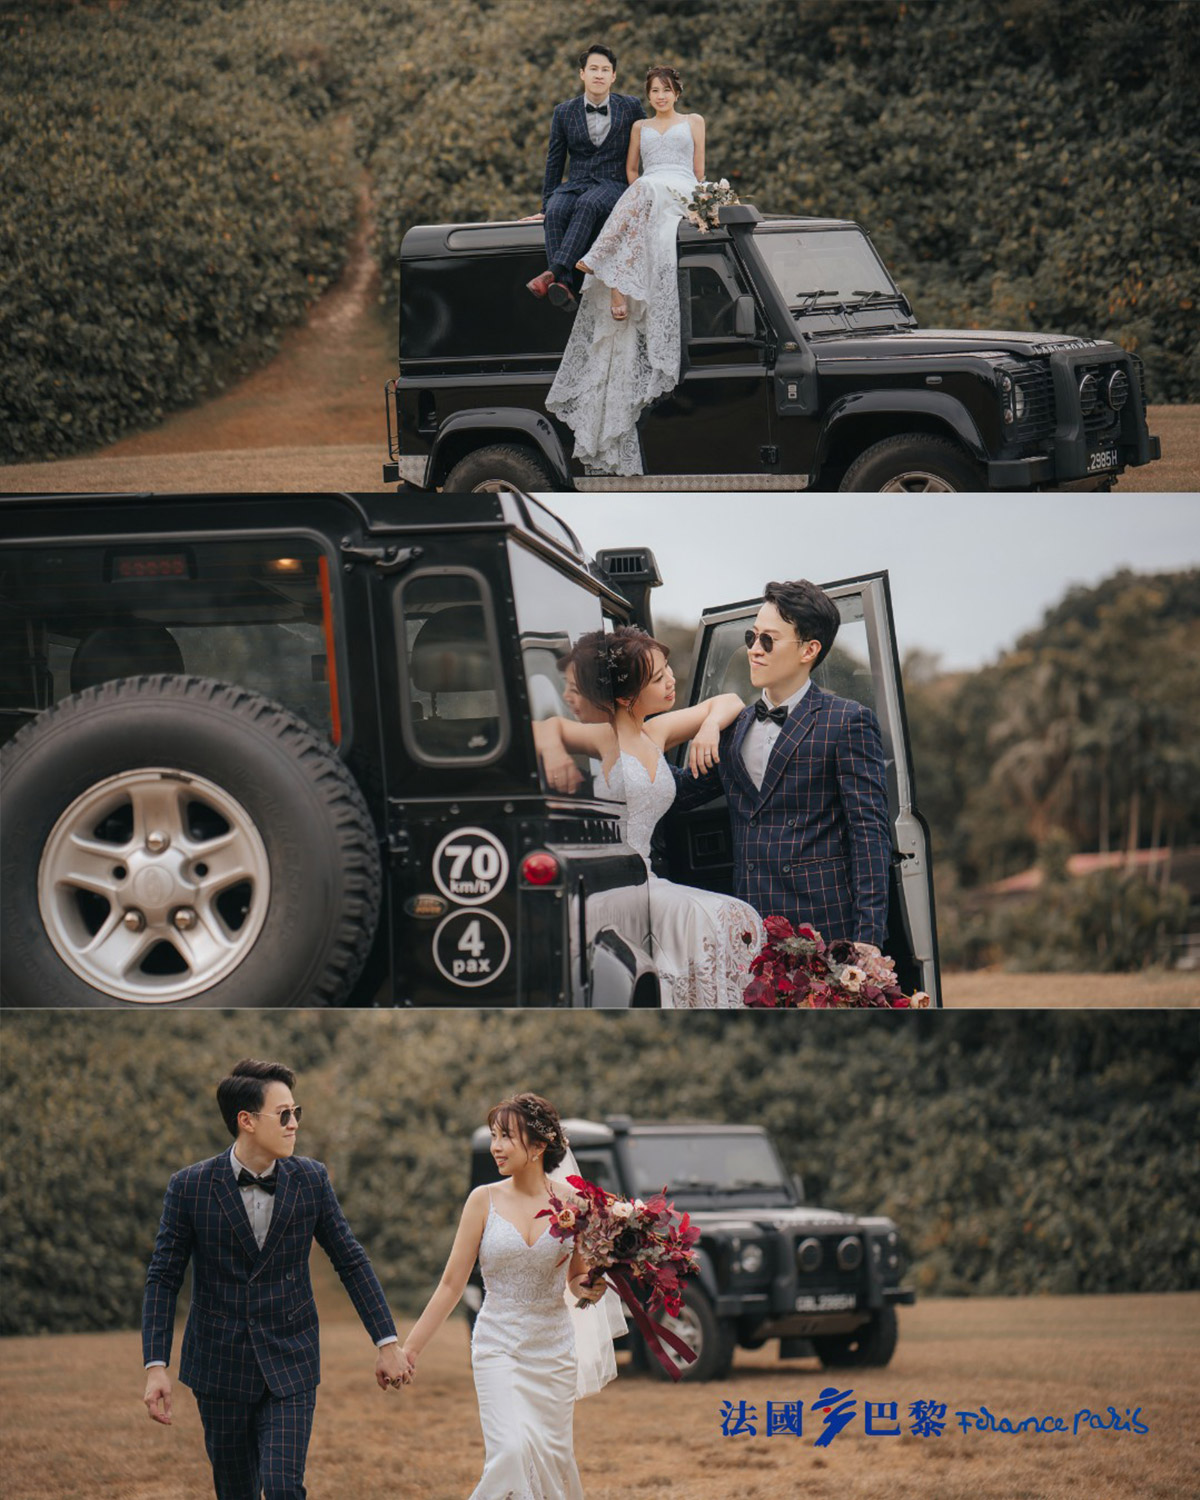 Pre-wedding Shoots in Singapore